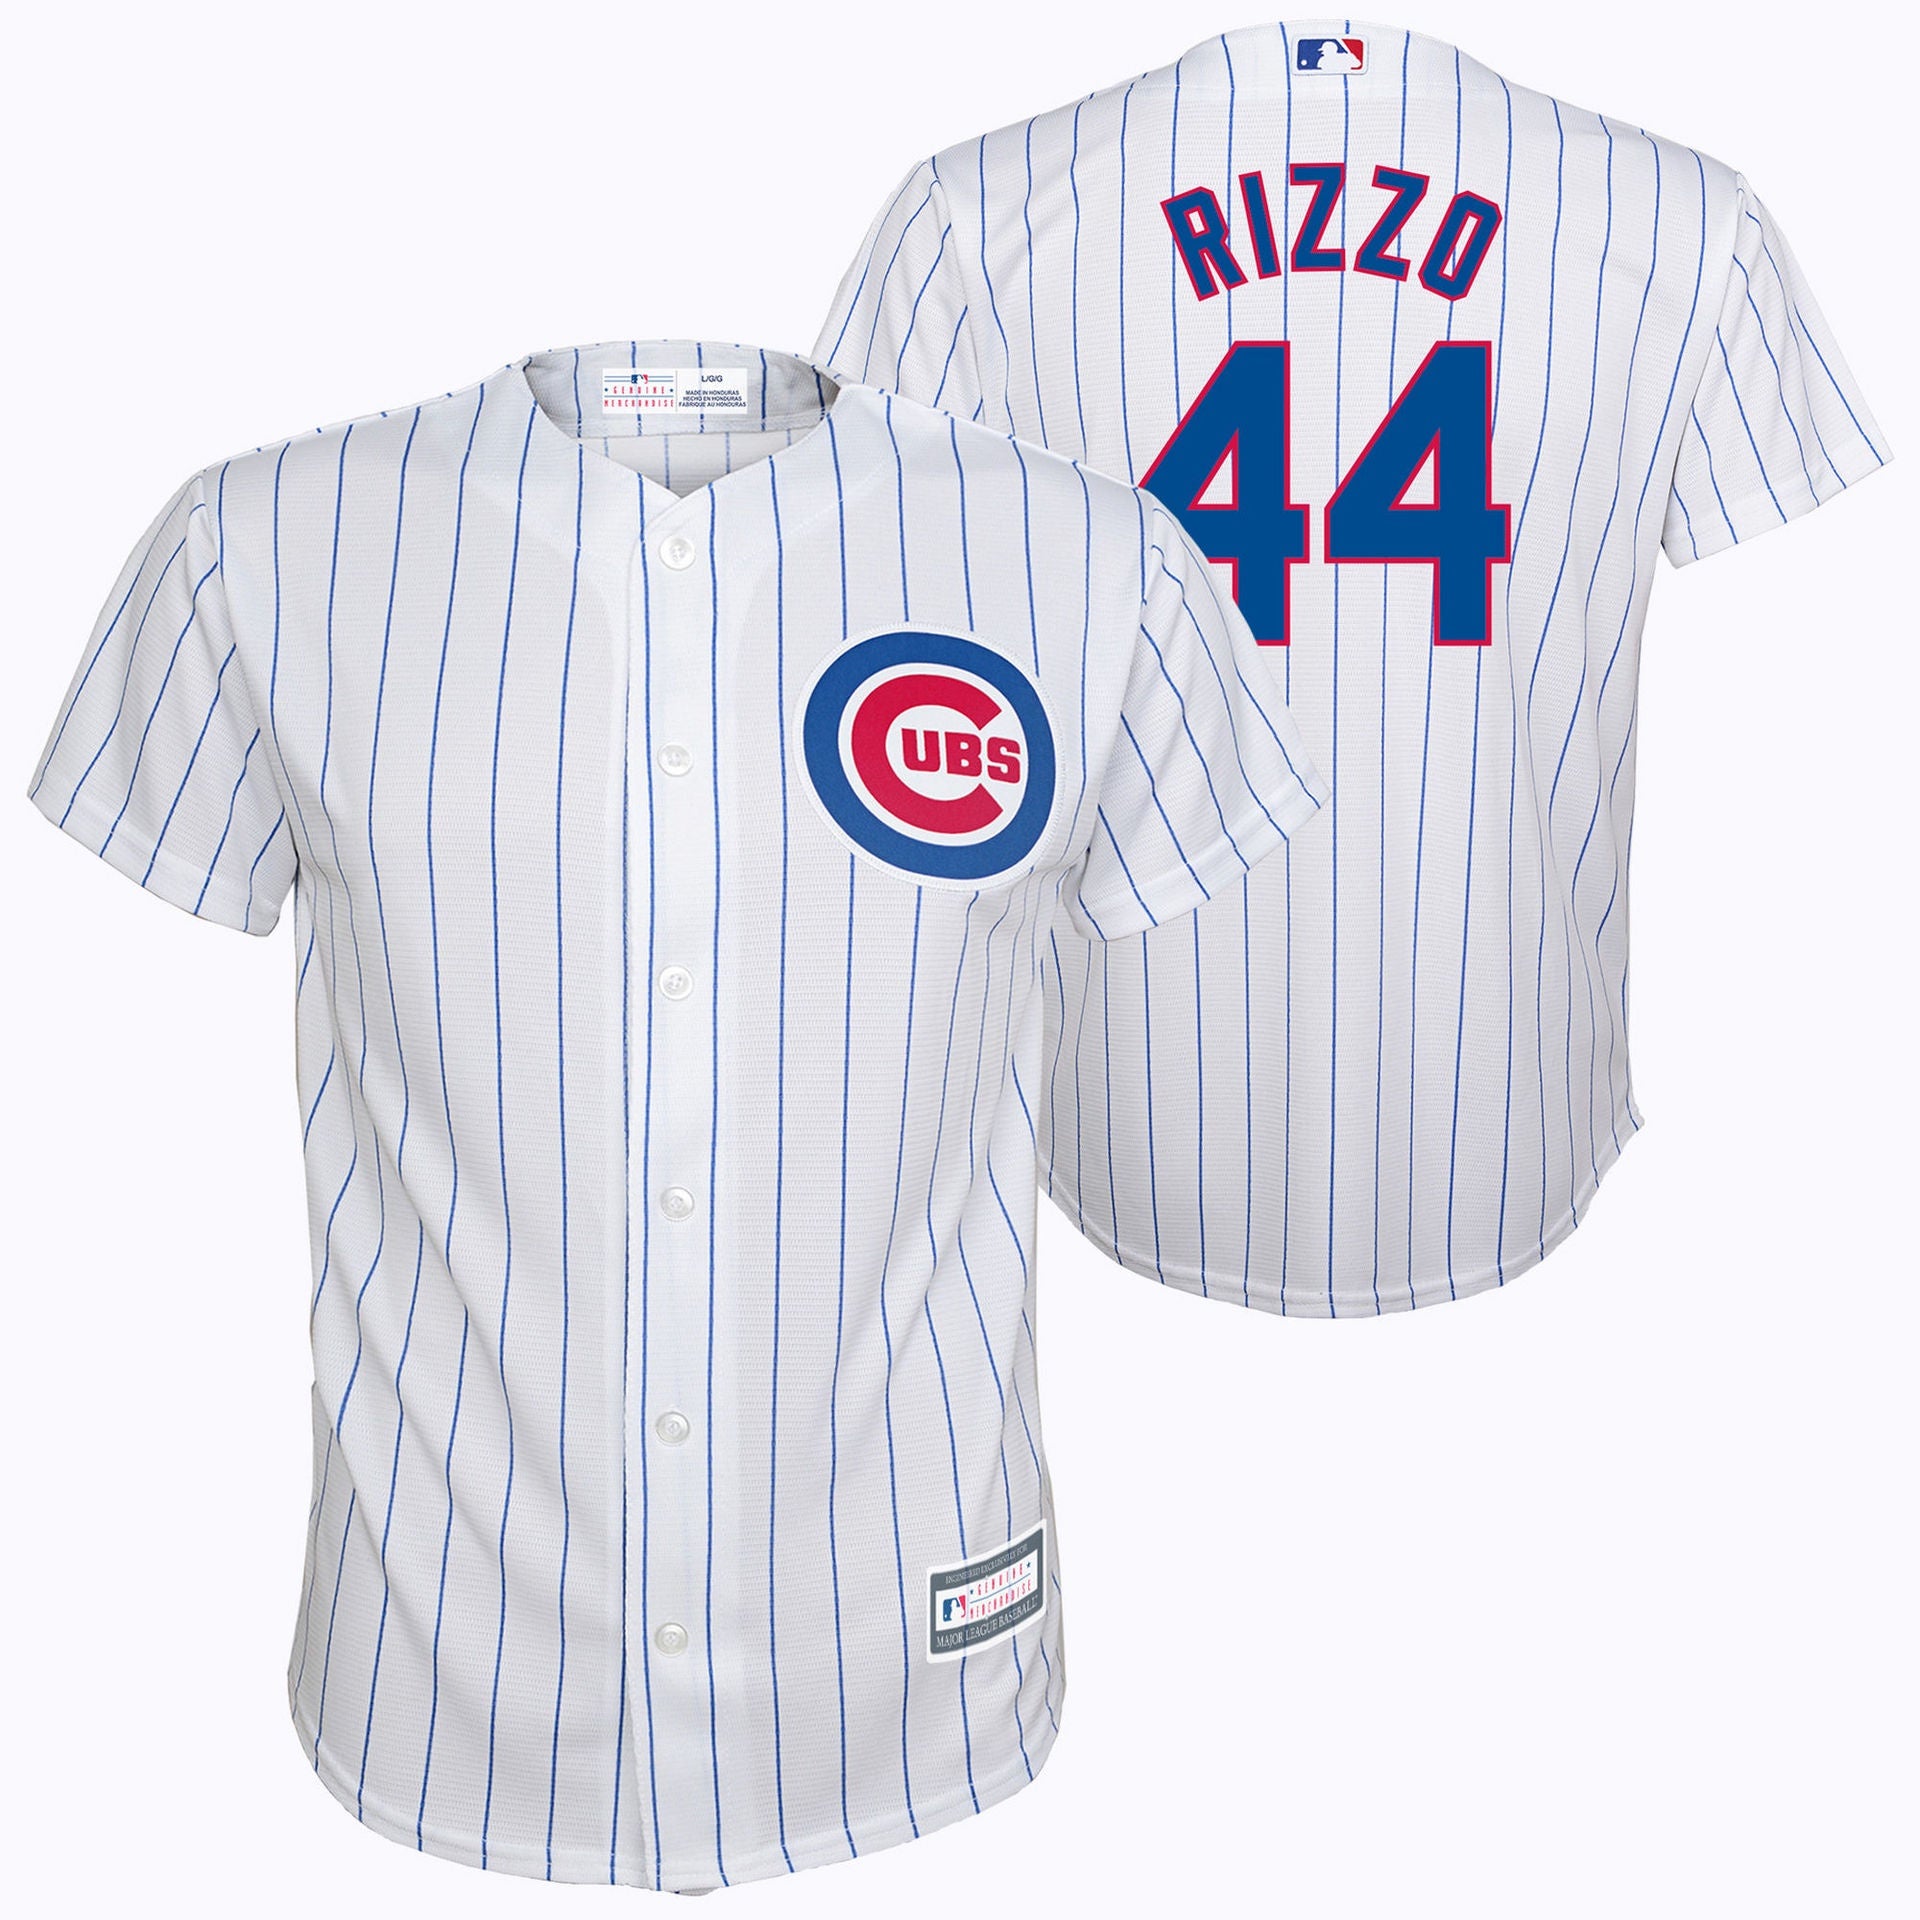 Men's Nike Anthony Rizzo White New York Yankees Home Official Replica Player Jersey, XL